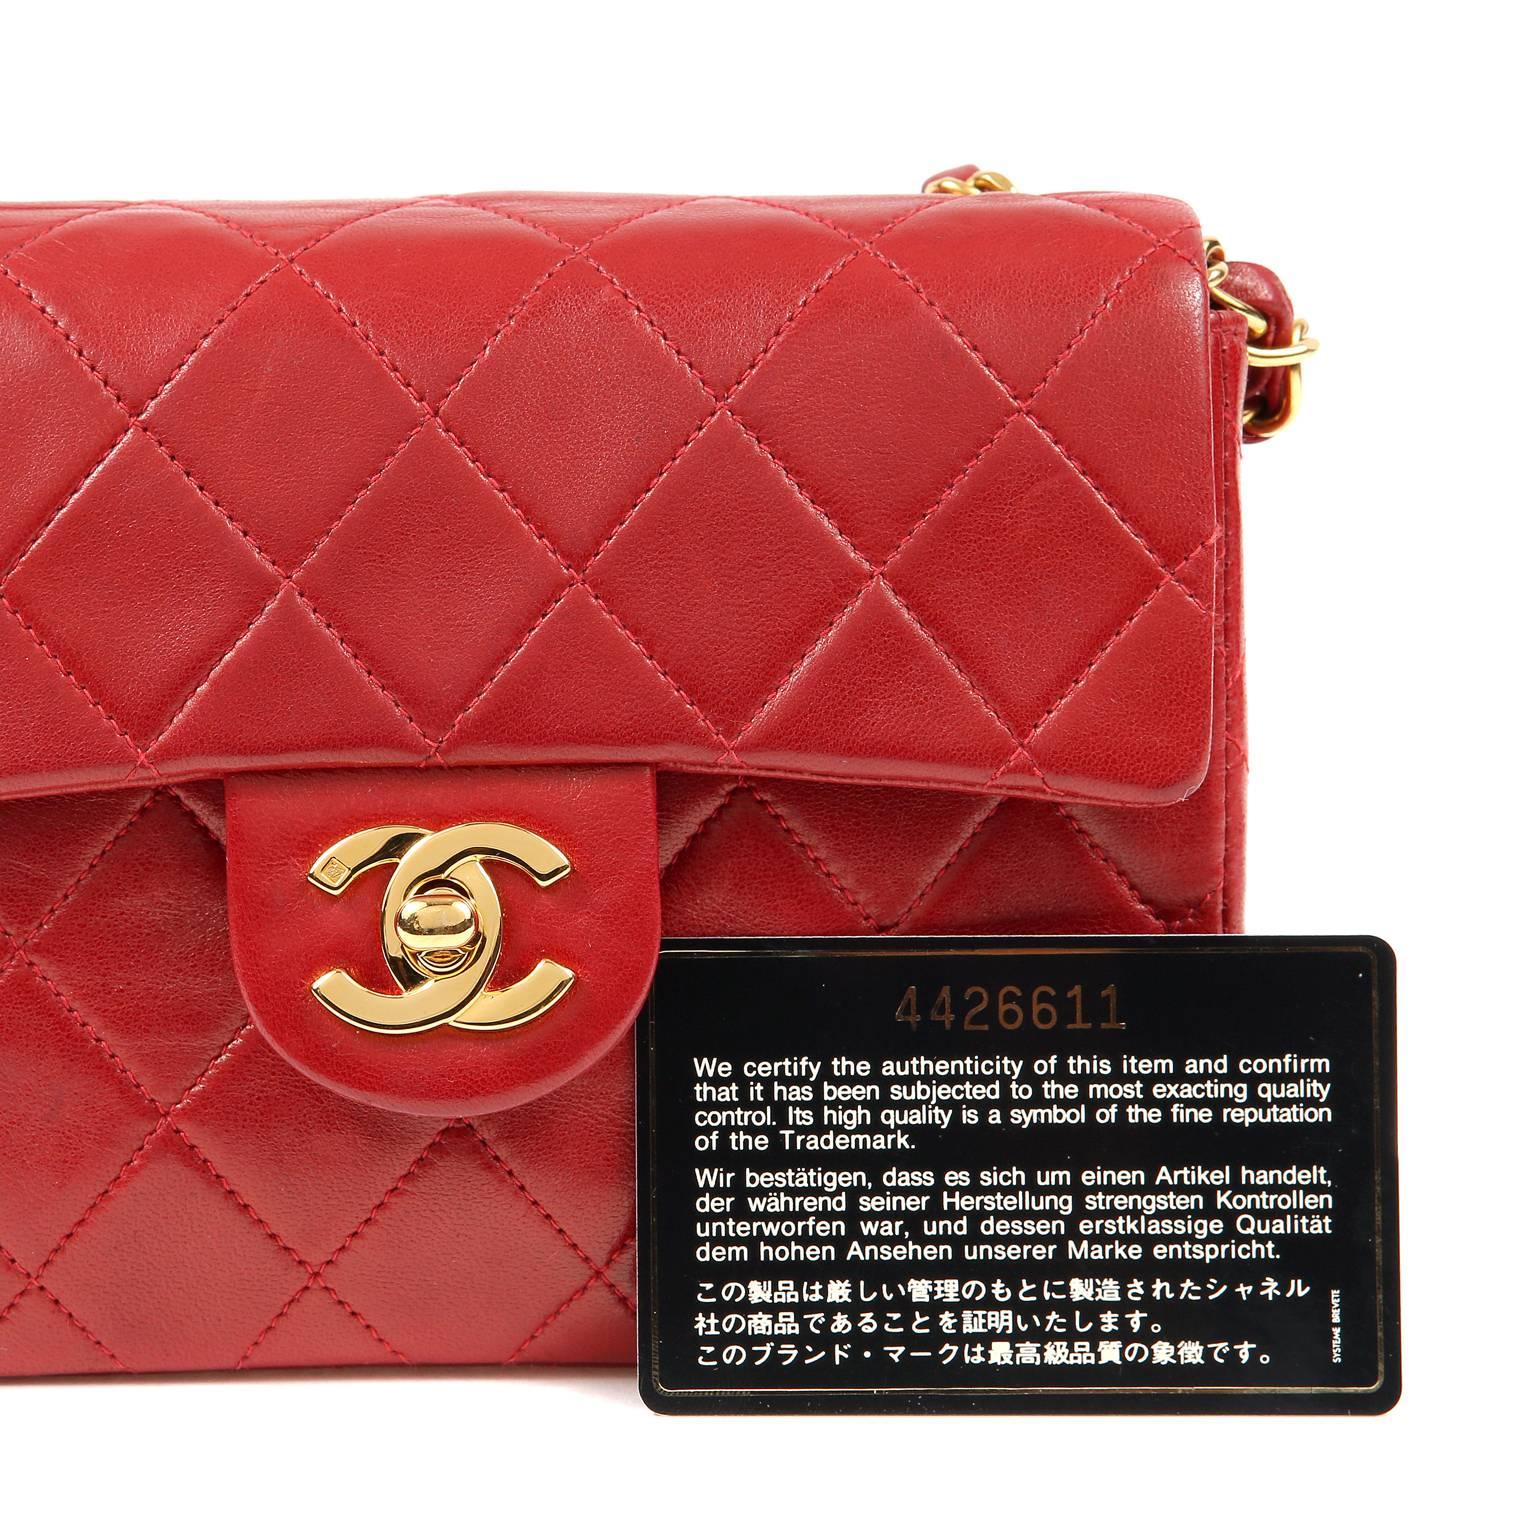 Chanel Red Lambskin Mini Classic Flap bag with GHW 6